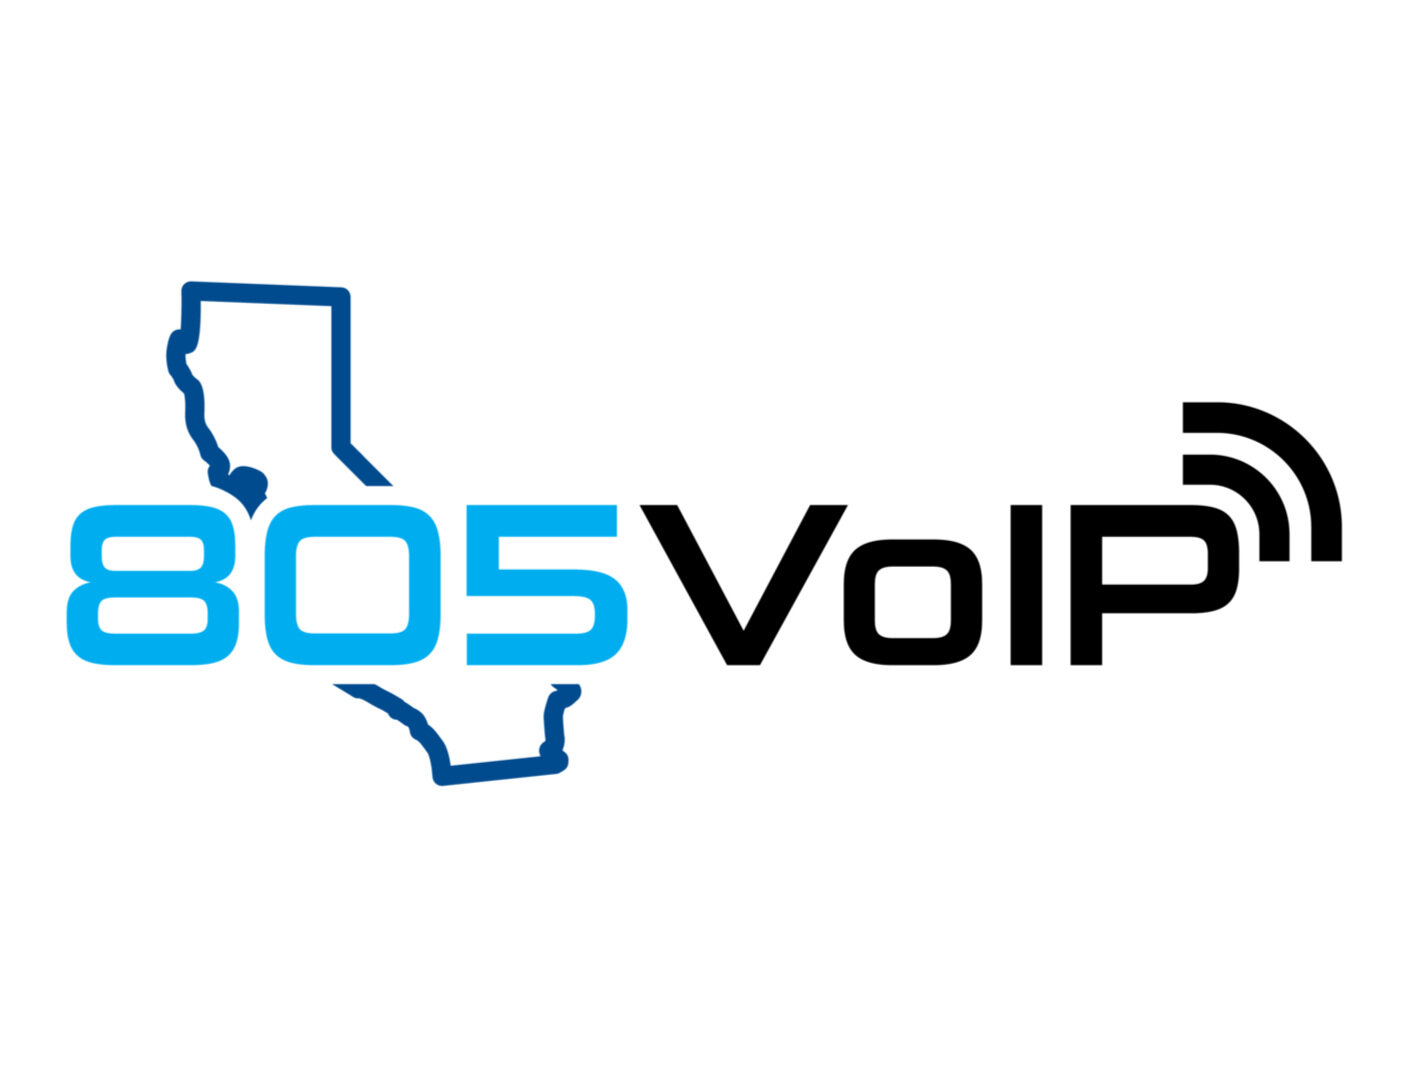 805VoIP